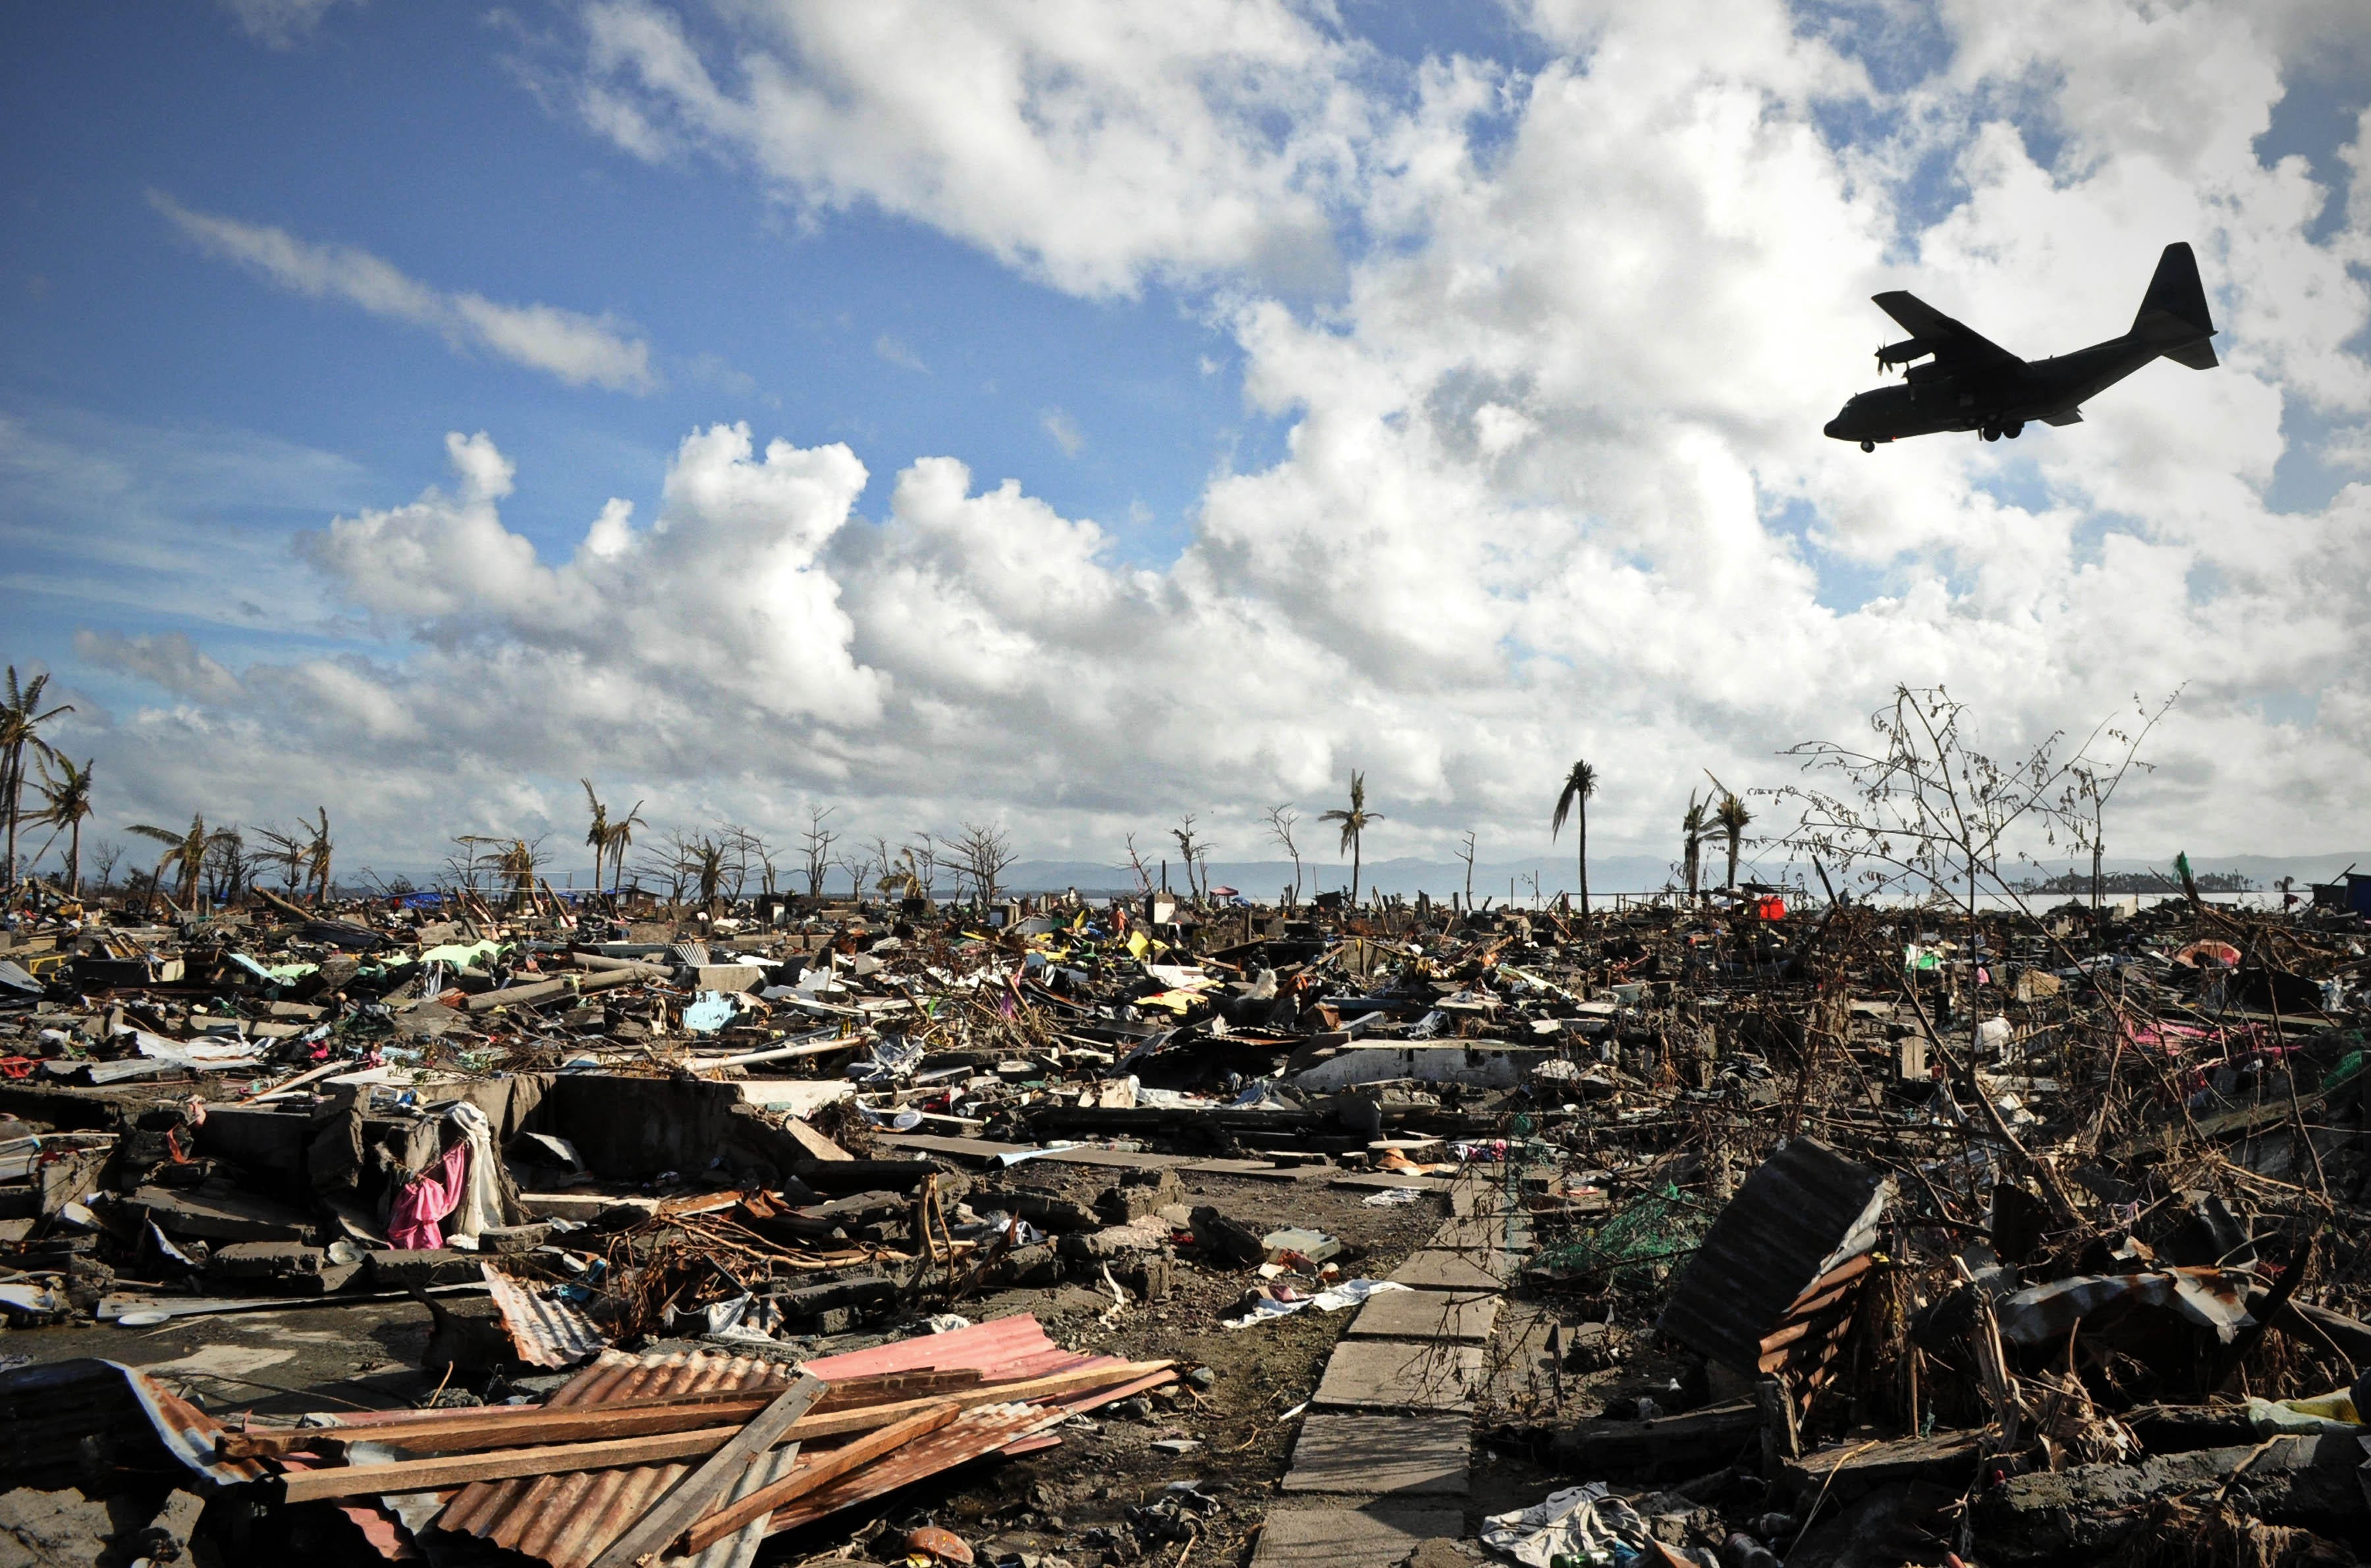 A military aircraft passes over a destroyed area of Tacloban City, the Philippines, after Typhoon Haiyan ripped through it in 2013. Photo: Alamy